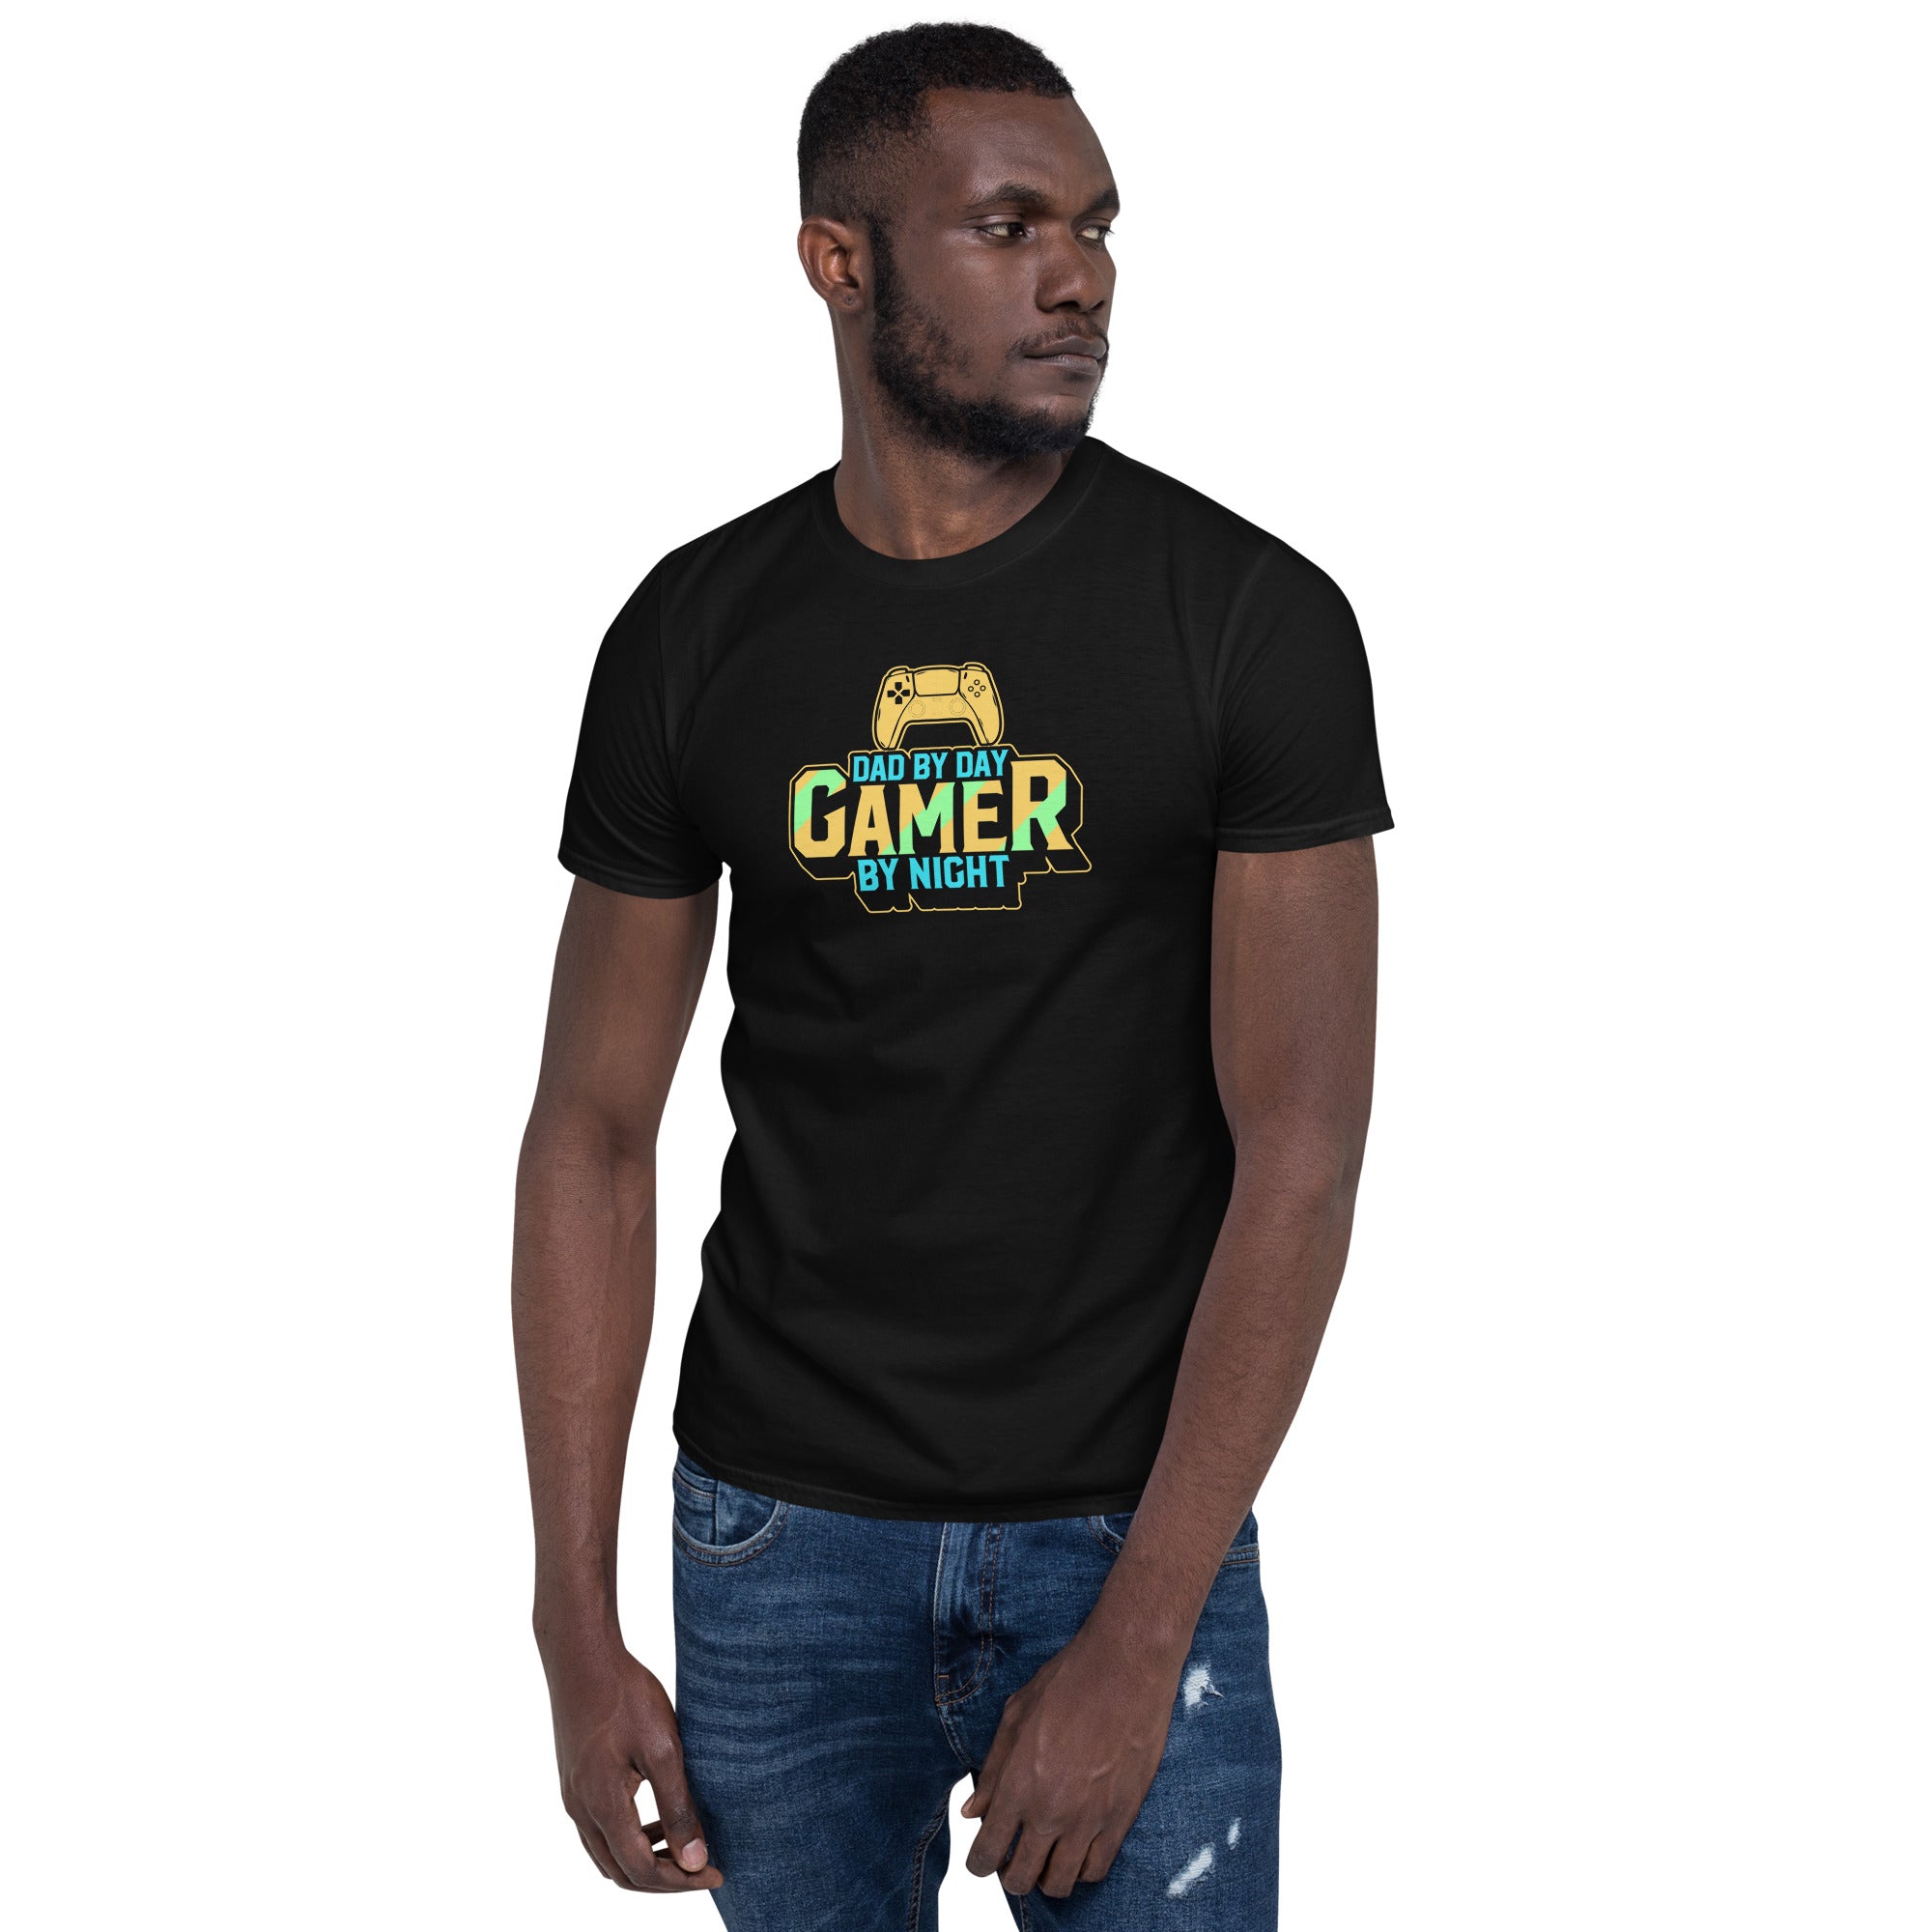 Dad By Day Gamer By Night - Short-Sleeve Unisex T-Shirt